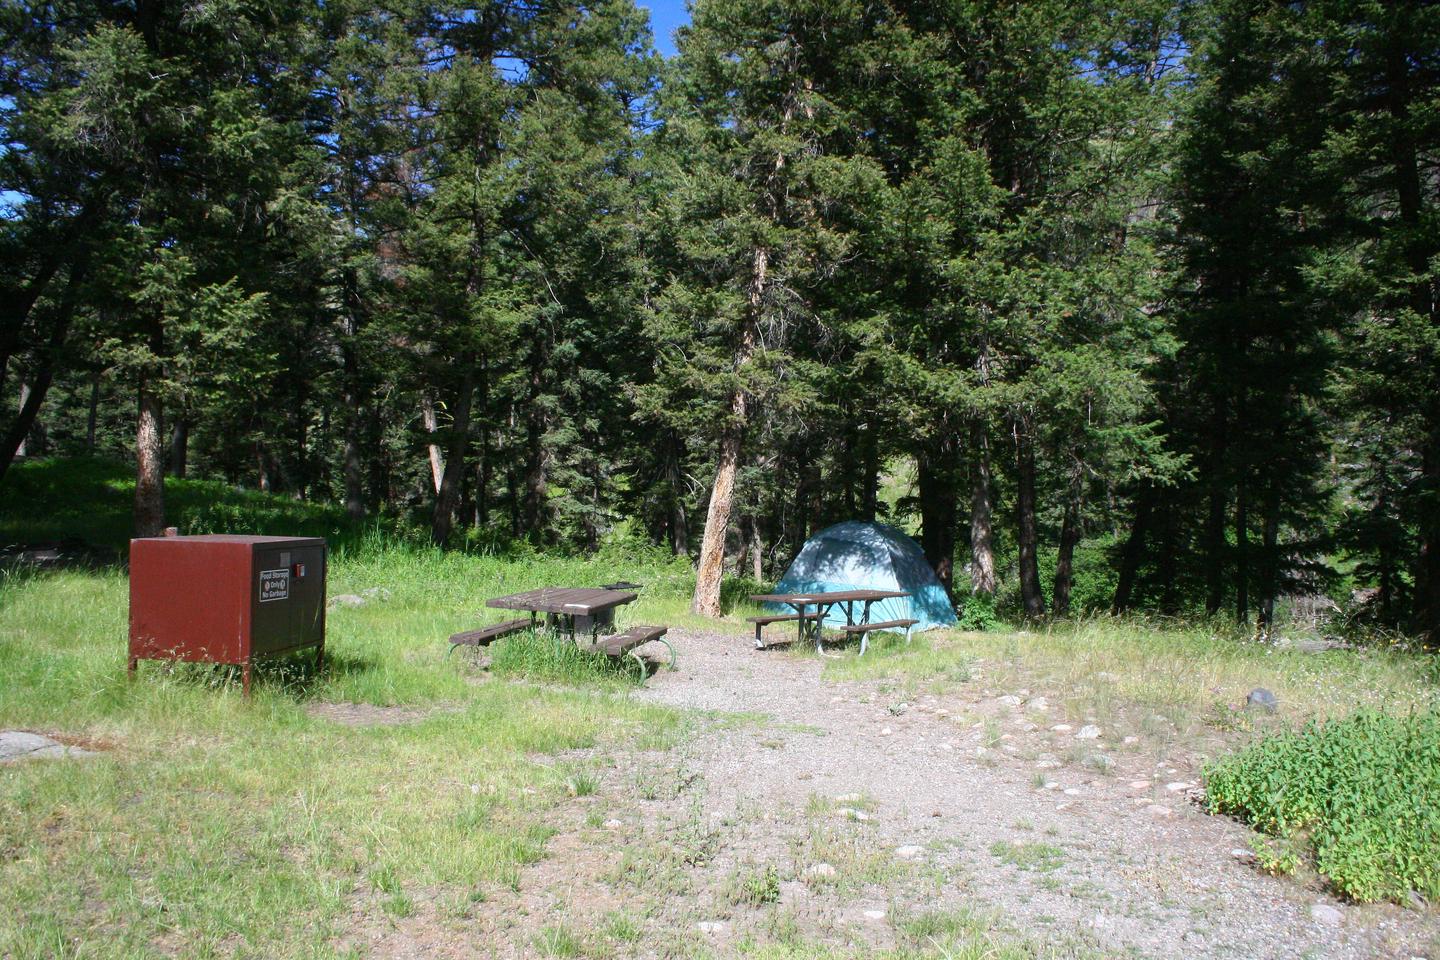 Slough Creek Campground Site #12.Slough Creek Campground Site #12